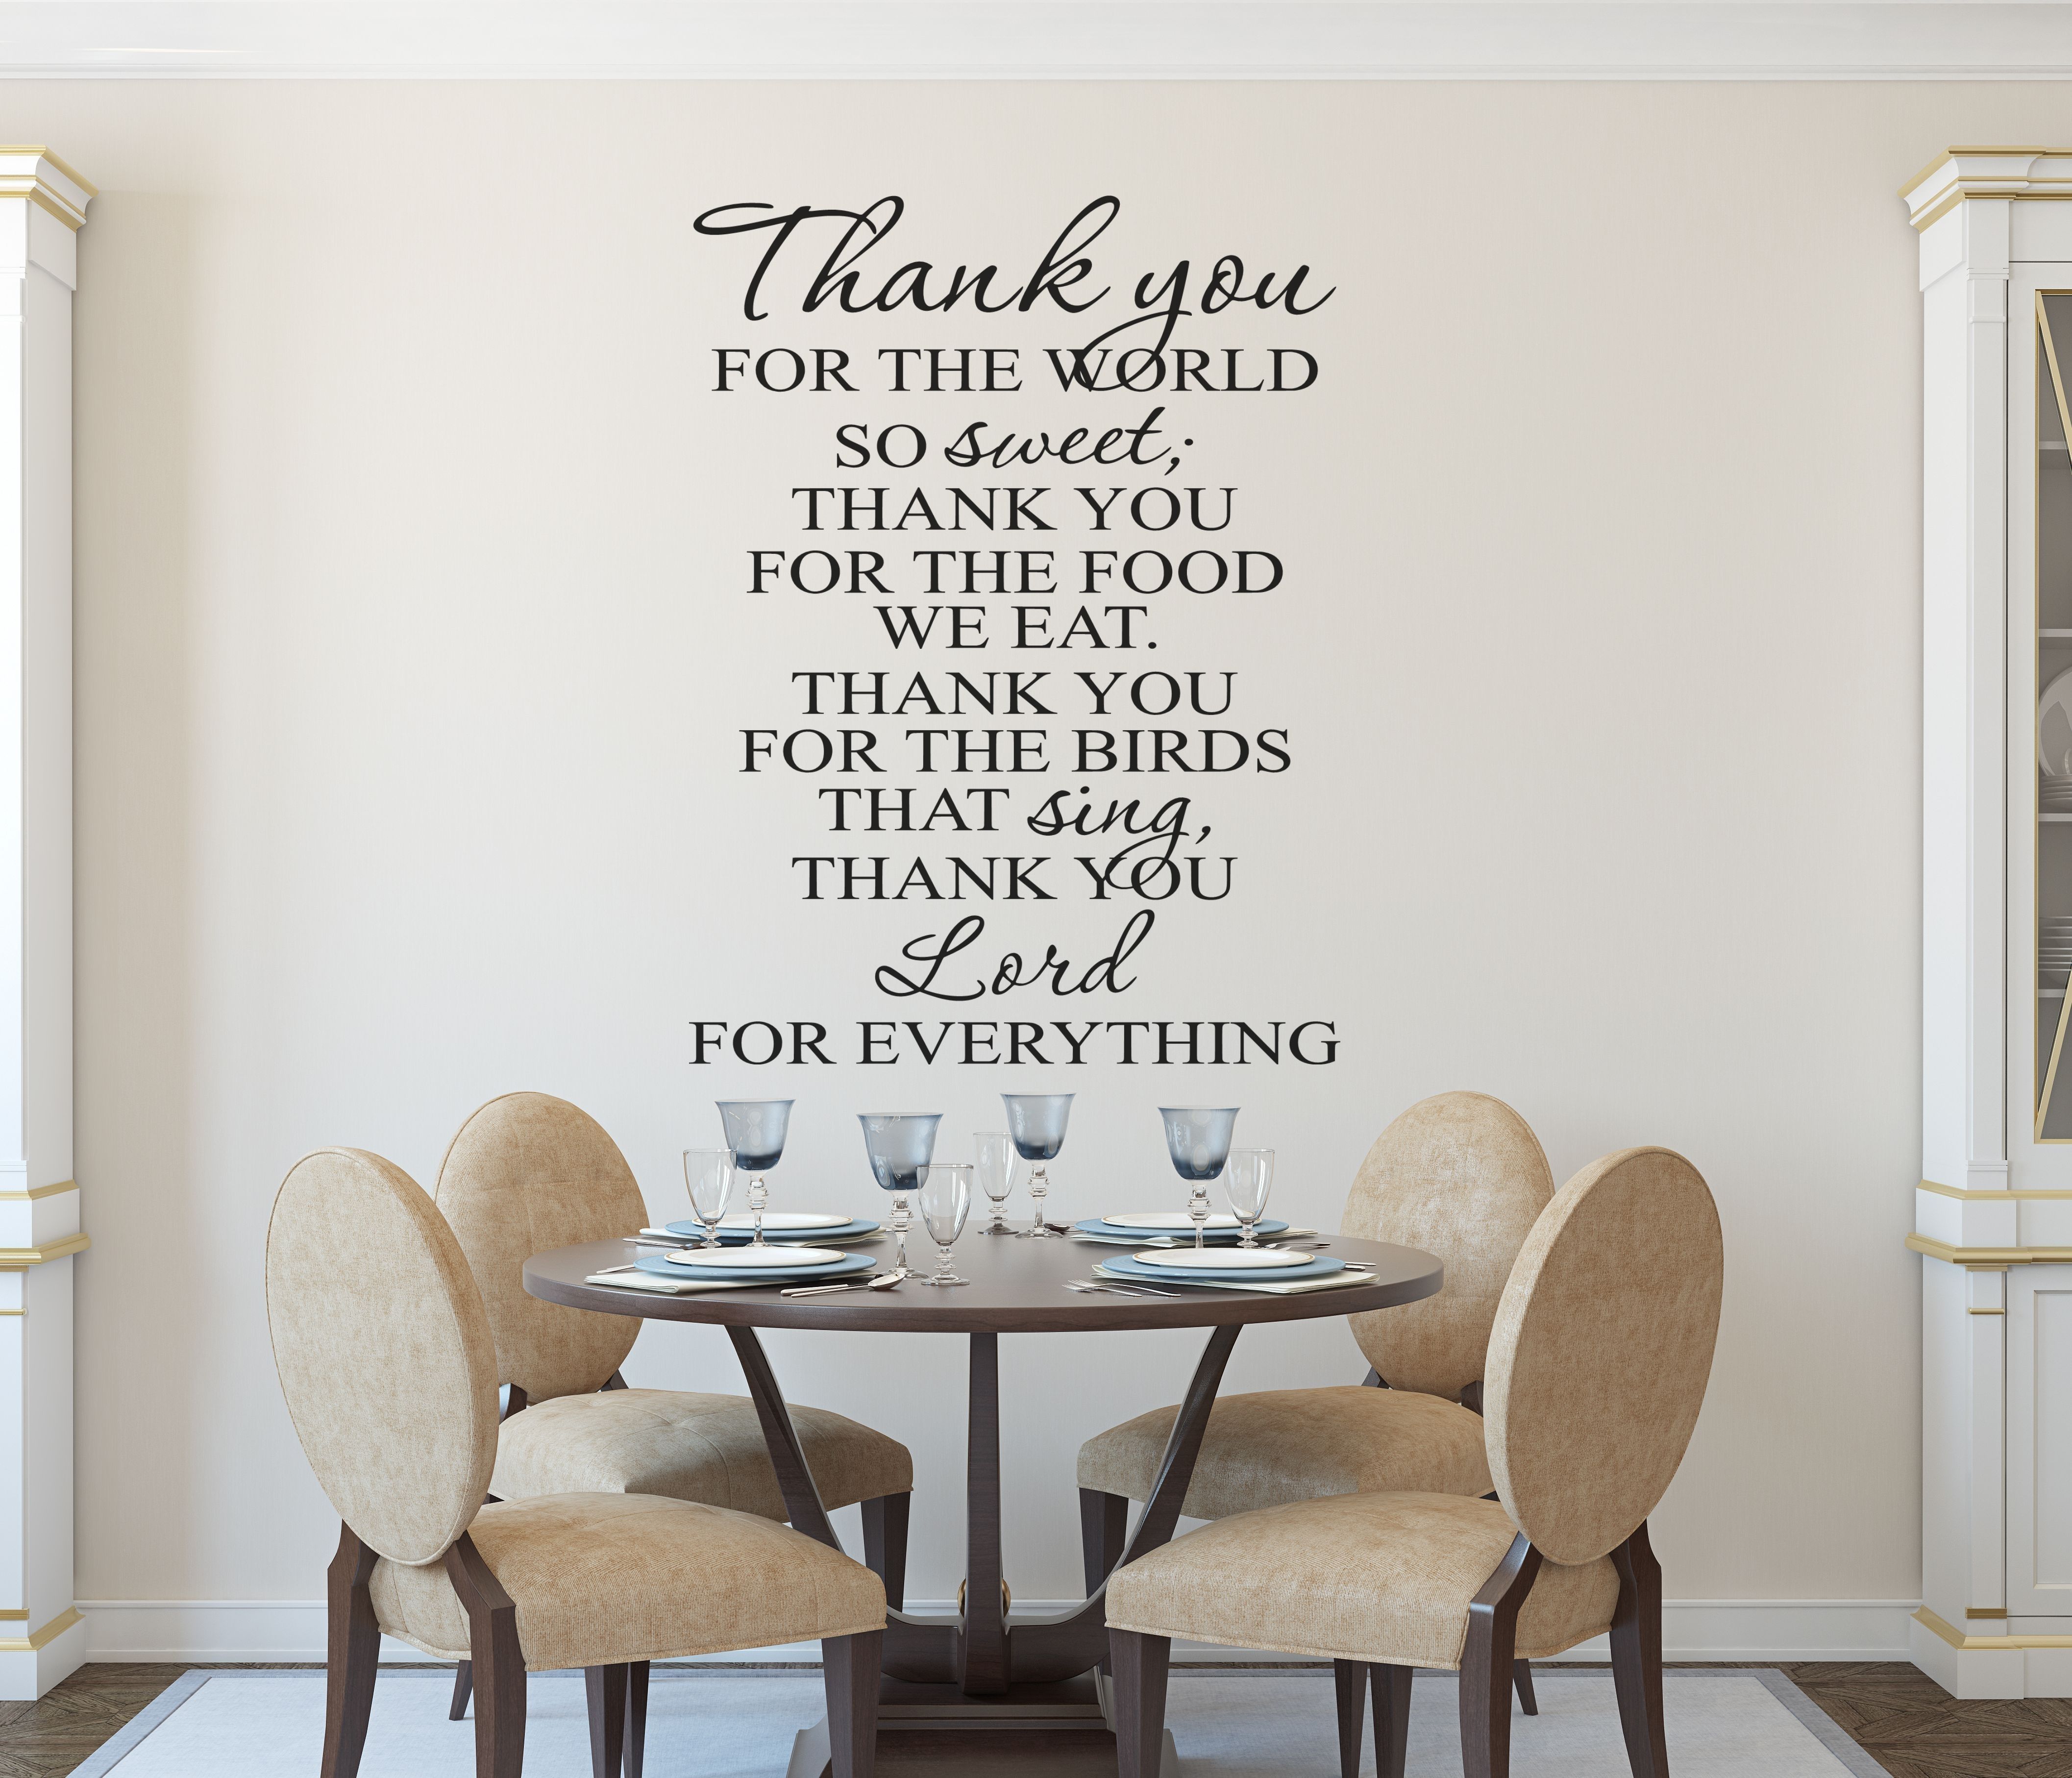 Fabulous Free Printable Wall Art Quotes Along With Calvin Then With Regard To Wall Art For Kitchen (View 16 of 20)